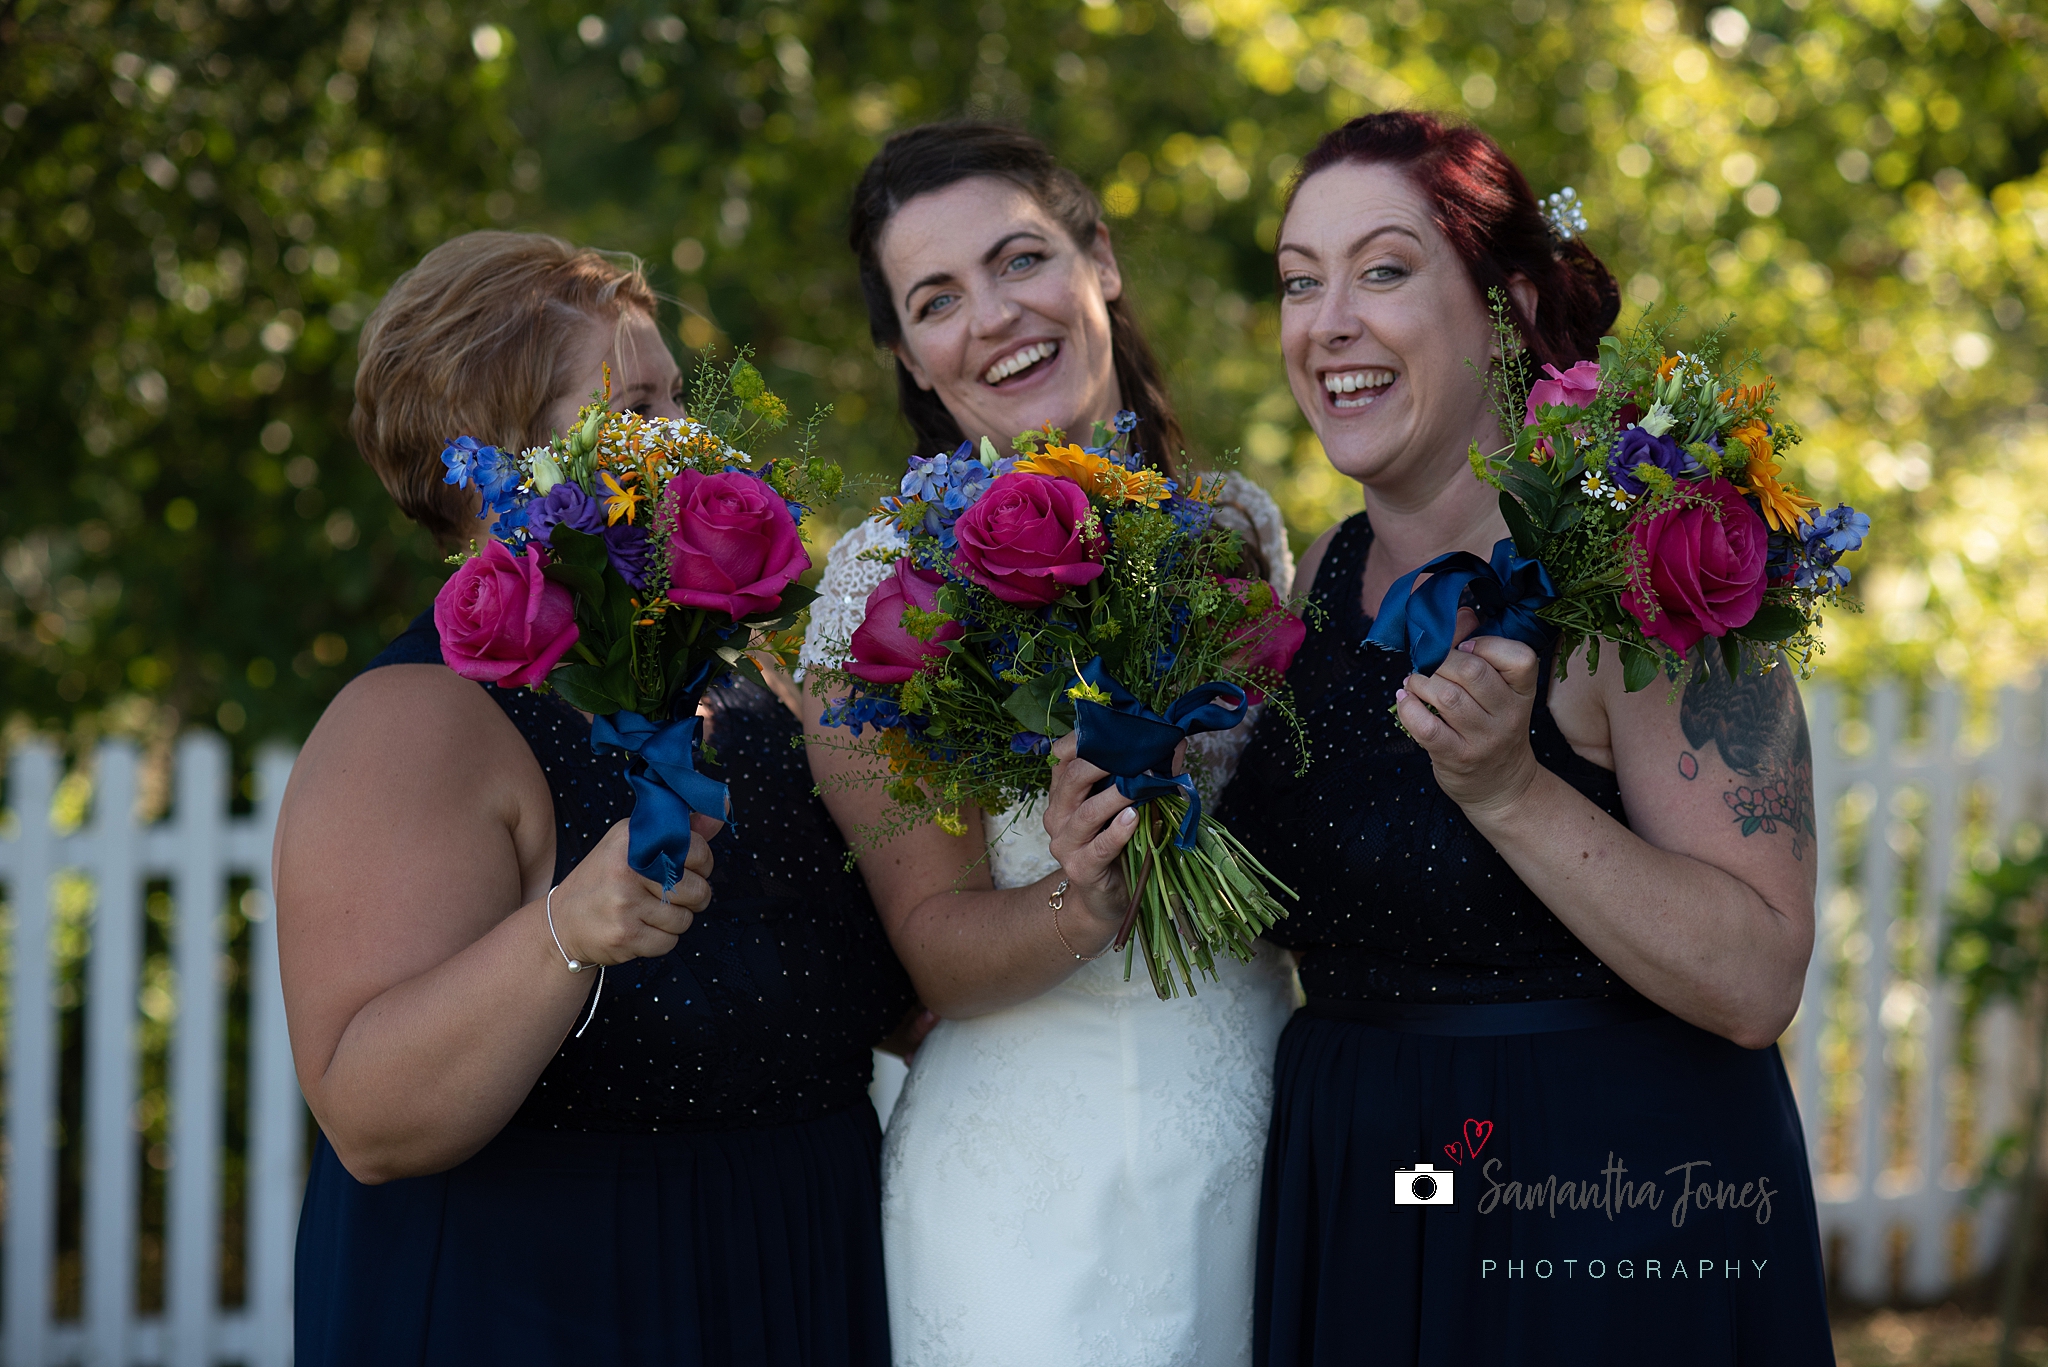 bride and bridesmaids floral bouquets Kent wedding at Stonelees by Samantha Jones Photography